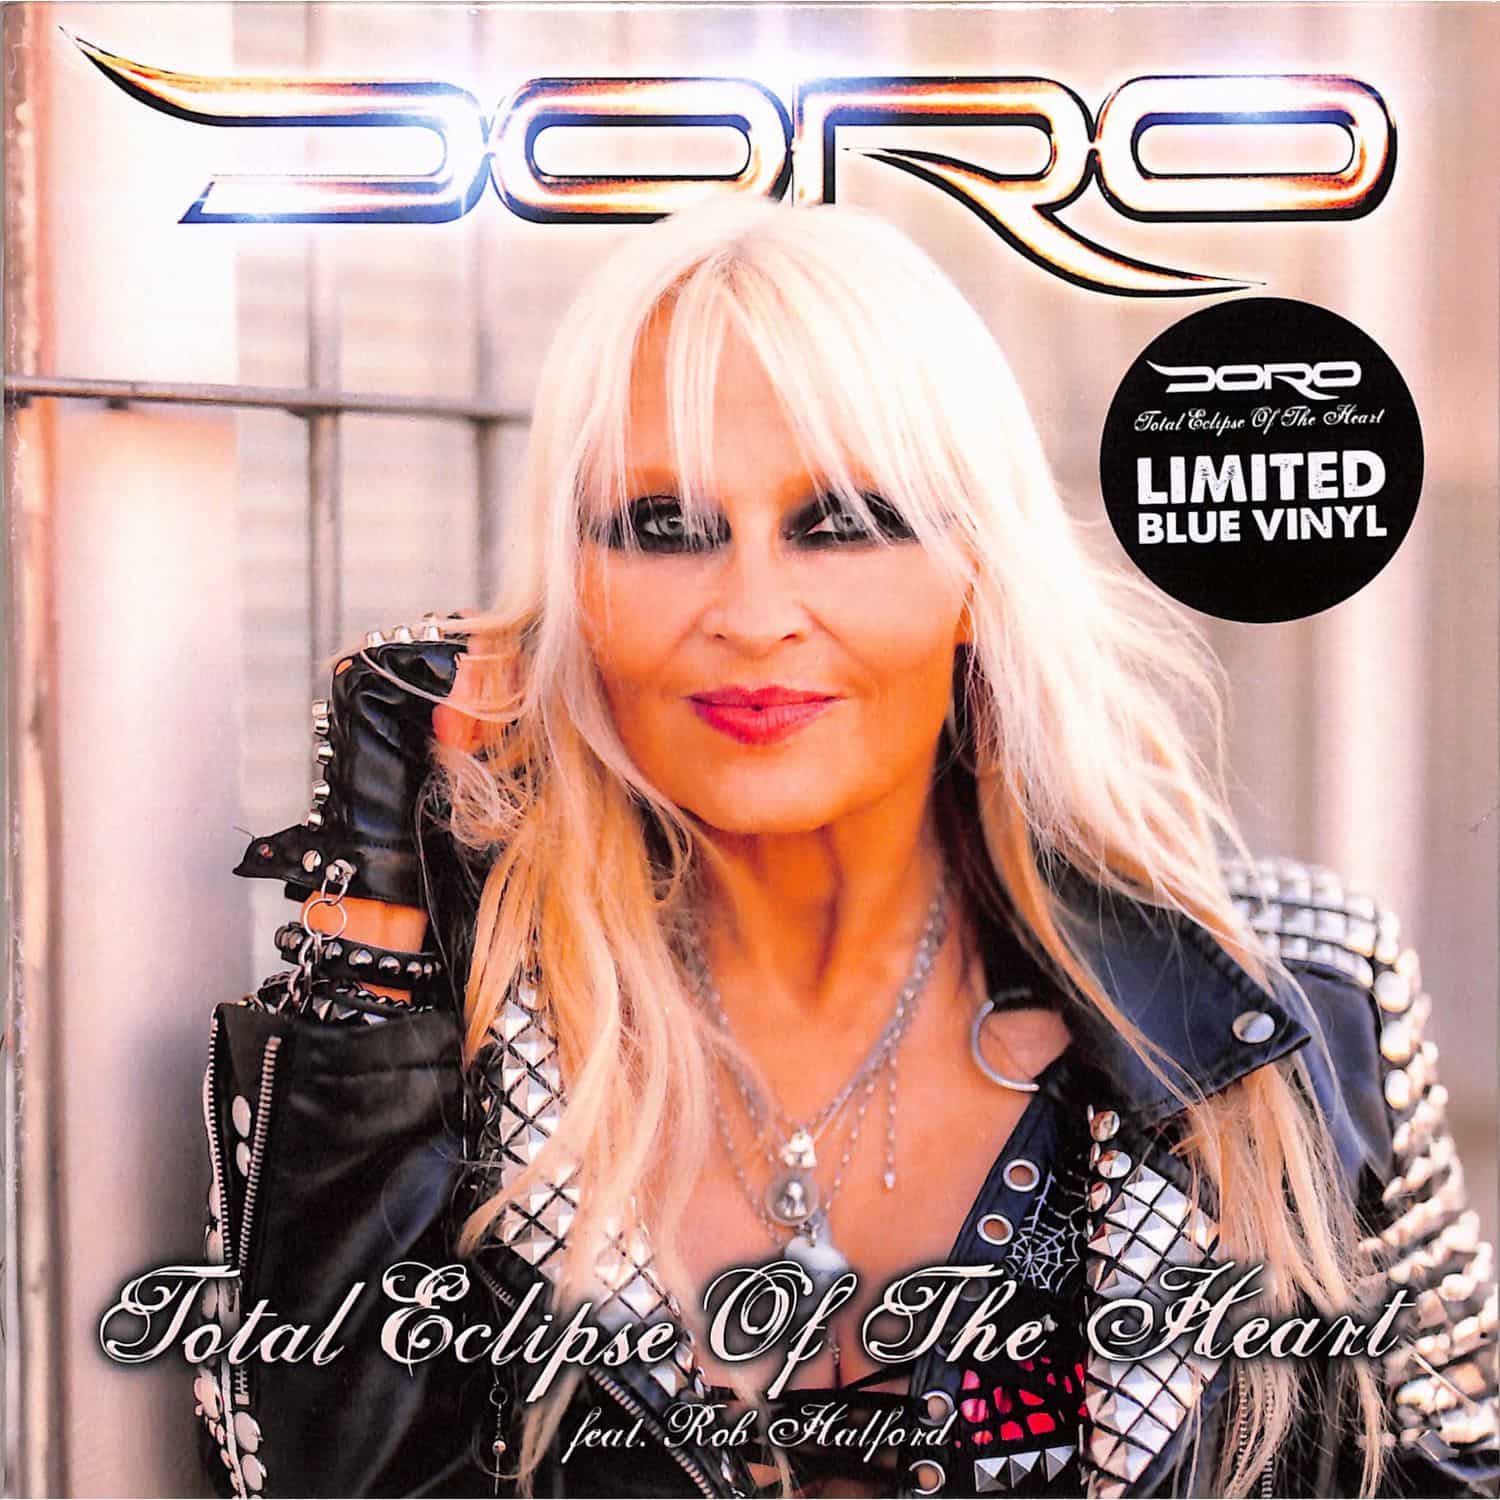 Doro - TOTAL ECLIPSE OF THE HEART 